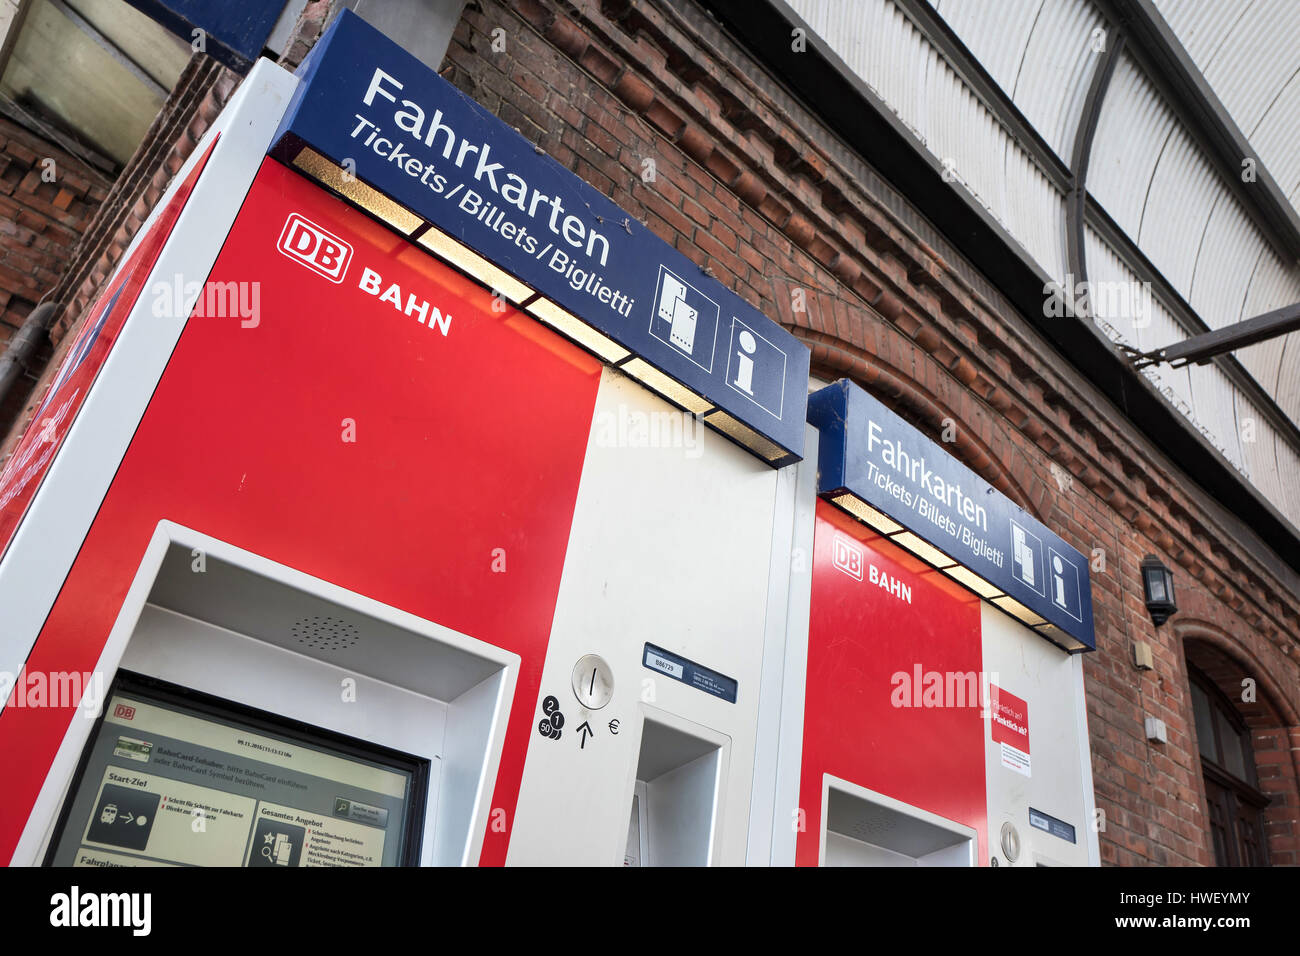 DB ticket machines. Deutsche Bahn AG is the largest railway operator and infrastructure owner in Europe. Stock Photo